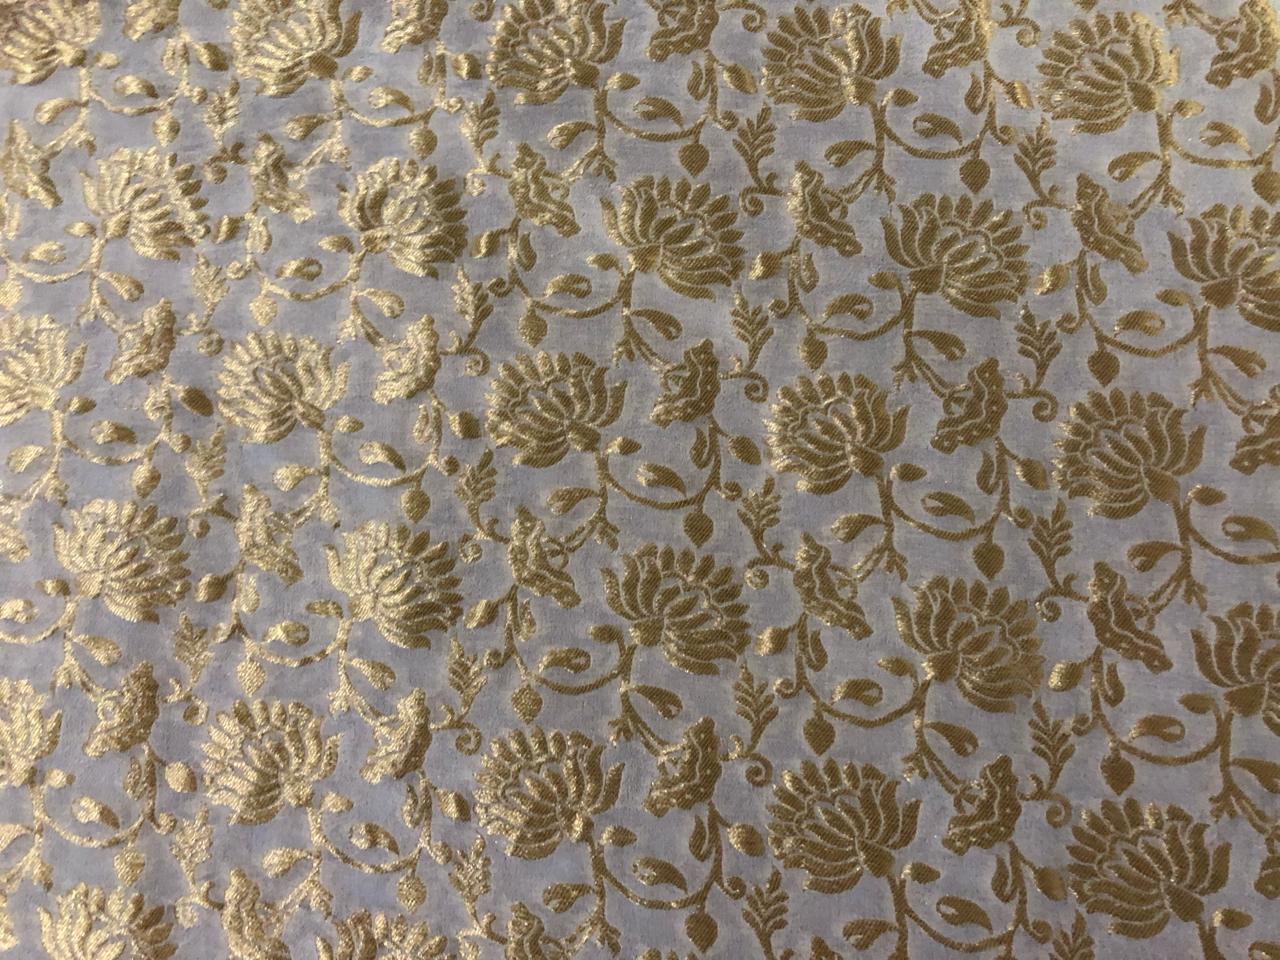 100% Silk CHIFFON fabric available in 3 colors white ivory and silver /white ivory and gold/white ivory and white gold BRO932[1/2/3]